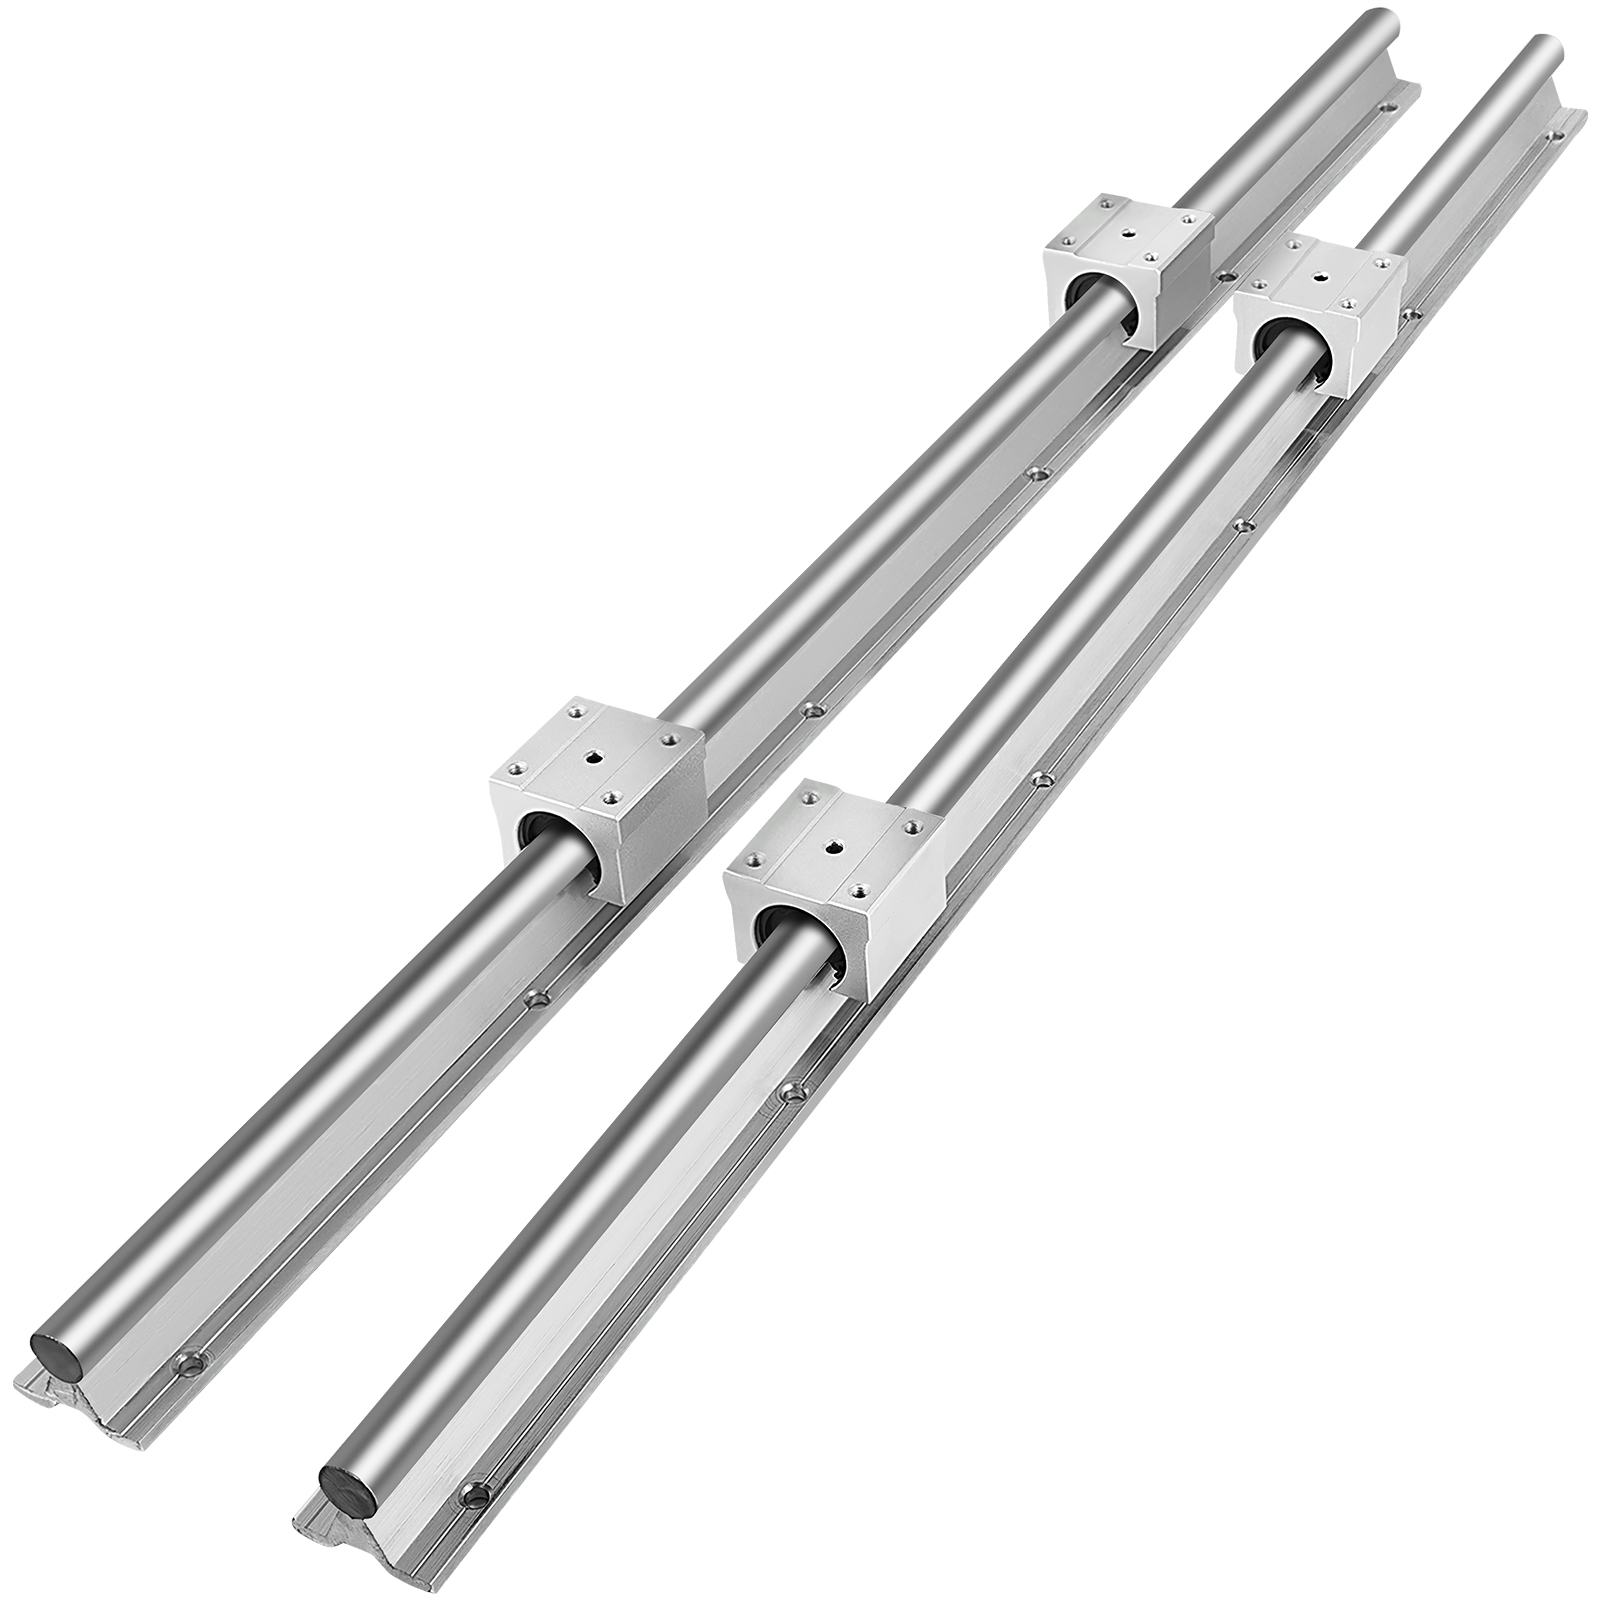 HEAVY DUTY 200mm x 16mm SQUARE FOOT OPERATED DOOR BOLT 